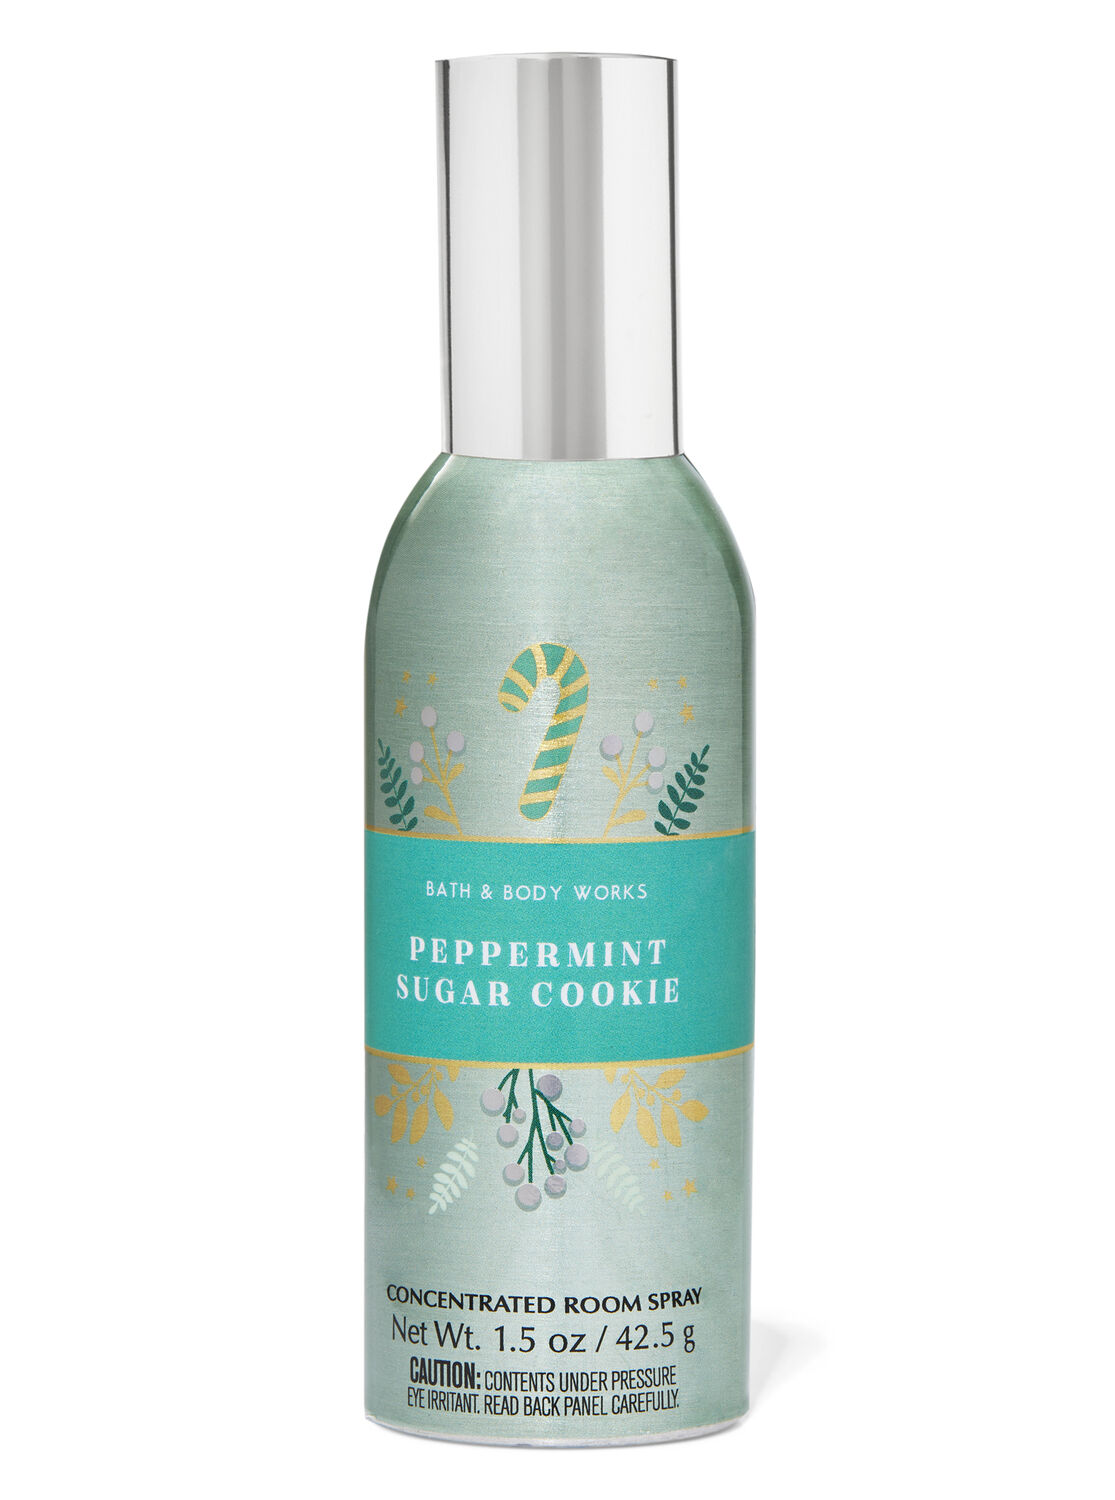 Peppermint Sugar Cookie Concentrated Room Spray